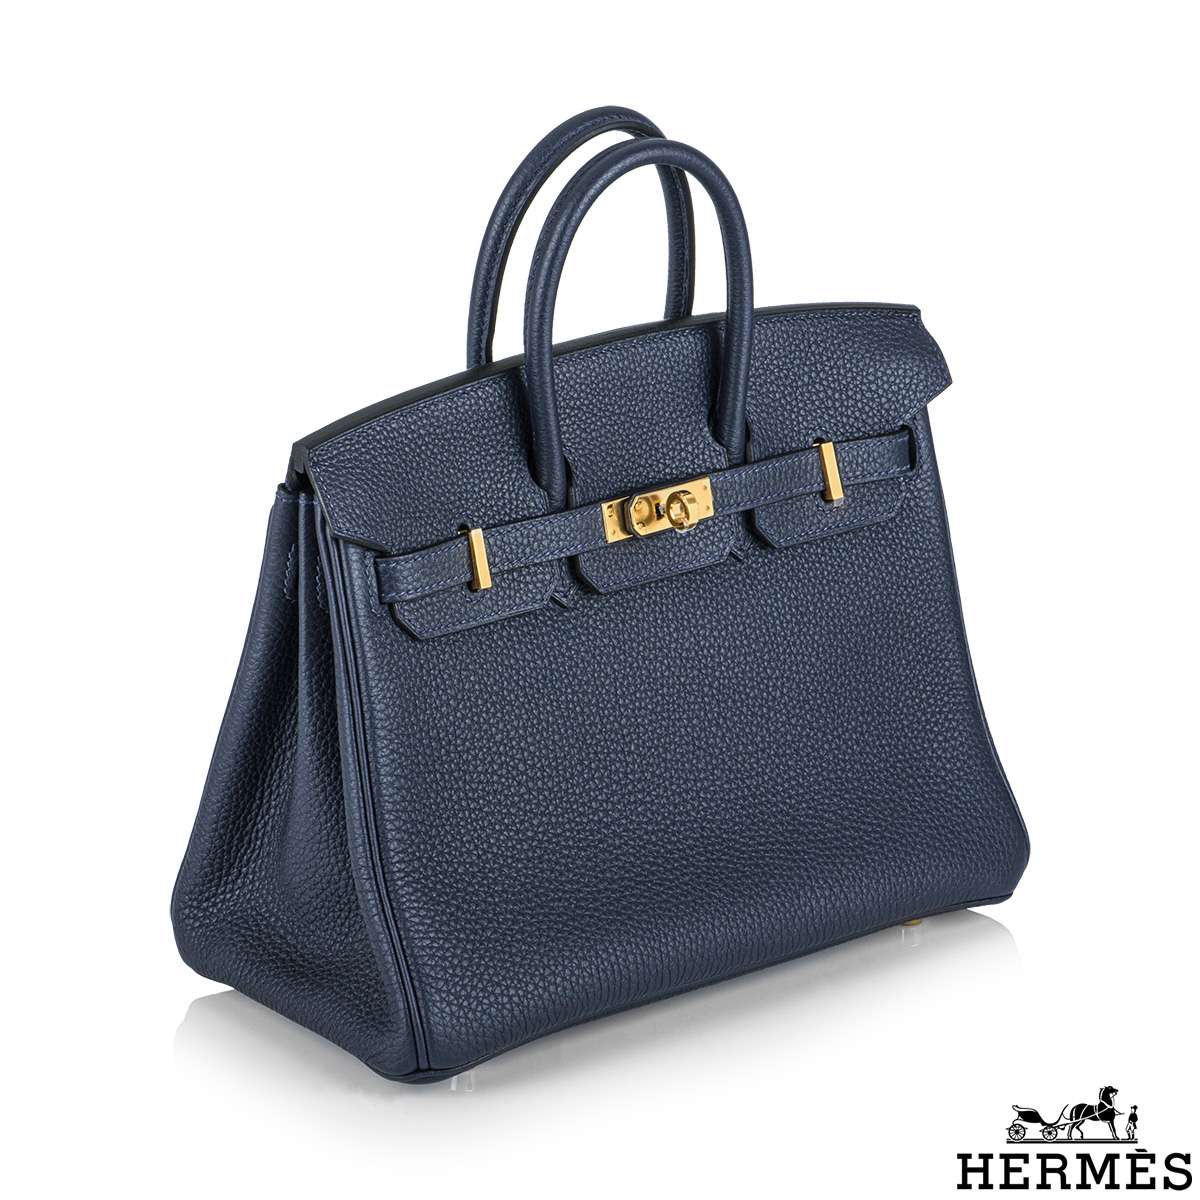 Kelly 25 Bleu Nuit in Togo Leather with Gold Hardware